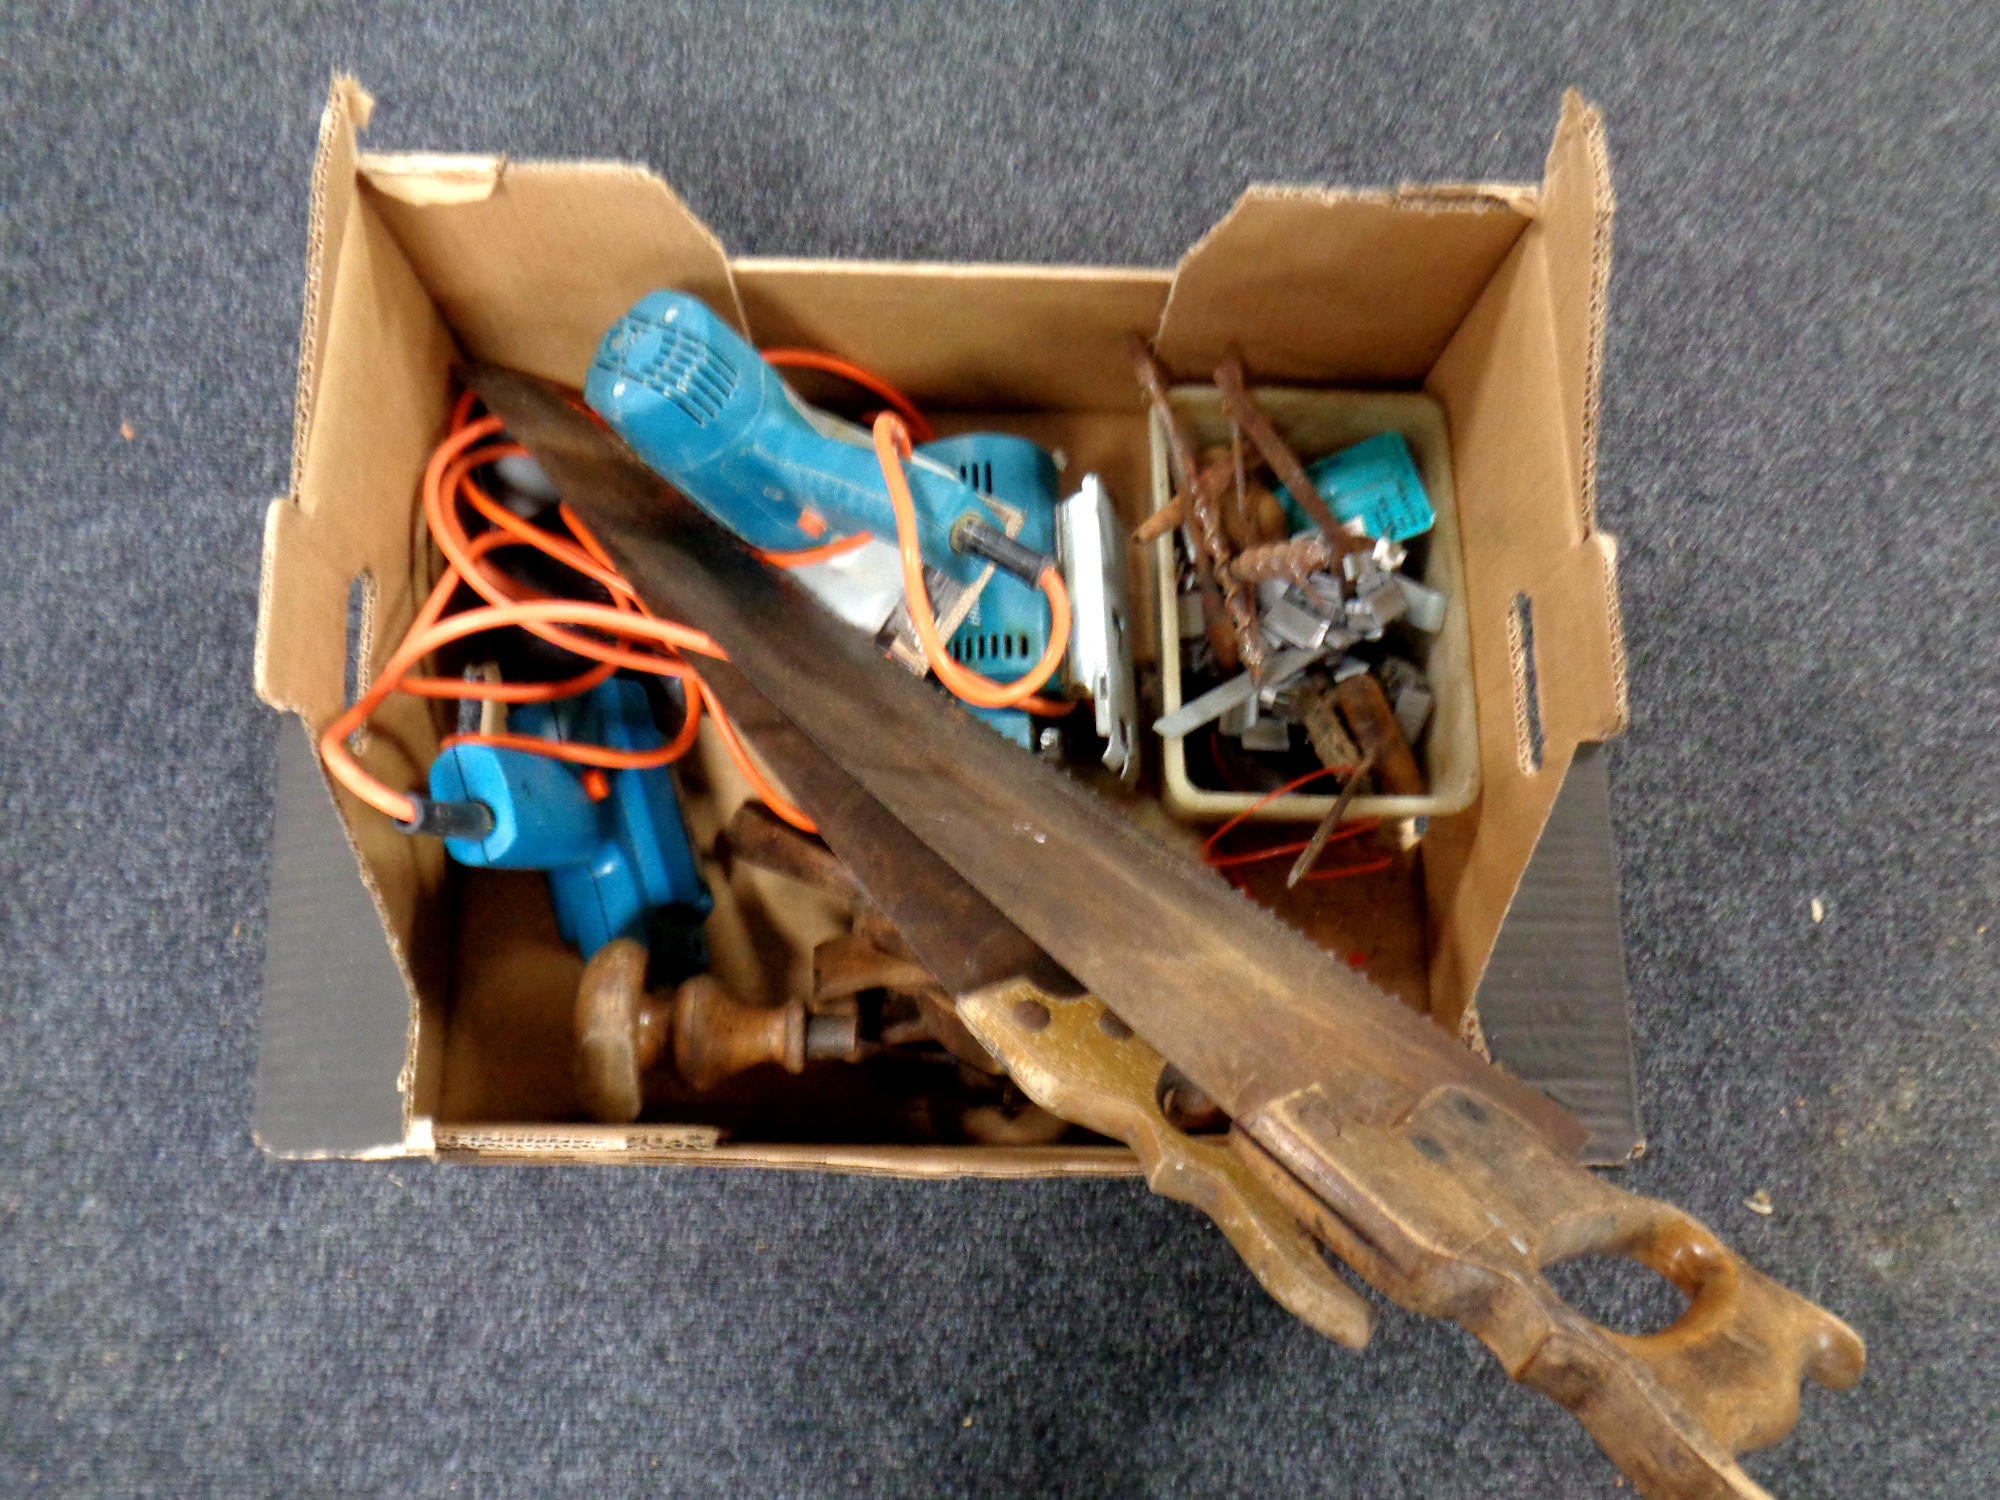 A box of vintage hand tools, power tools,